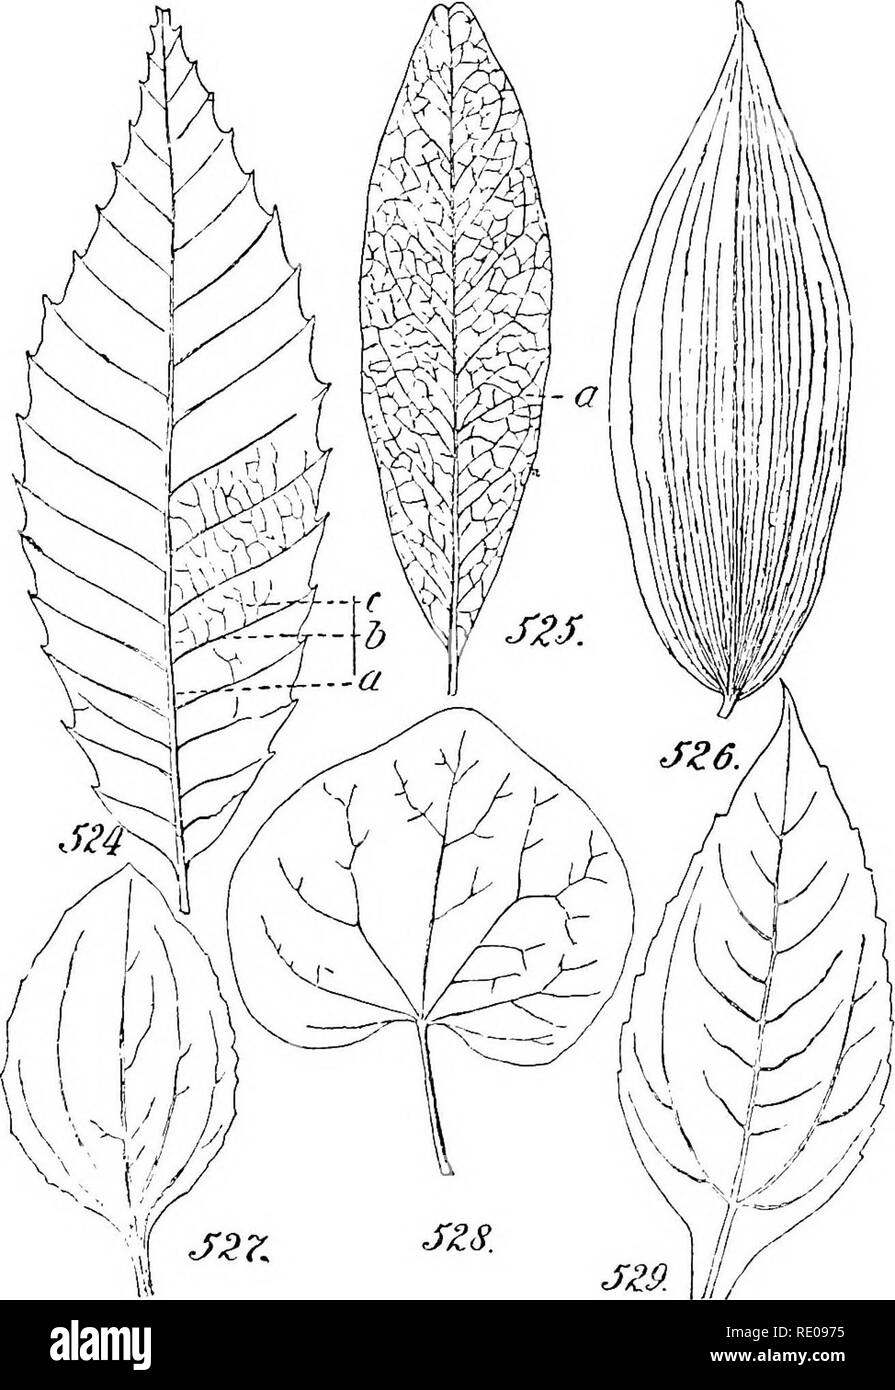 . A manual of structural botany; an introductory textbook for students of science and pharmacy. Plant morphology. VENATION OR NBRVATVRE 185 The forms all fall within two principal classes, which, in general, characterize respectively the monocotyledons and the dicotyledons. The former bears its principal veins more or less parallel with one another, and these are numerous. Such leaves are called Parallel- veined (Fig. 526).. Venation or Nervature: Fig. 524, Pinnately veined leaf of Castanea: a, midrib; b, secondaries: o, tertiaries. 525. Reticulate leaflet of Pilocarpus: a, anastomosis of seco Stock Photo